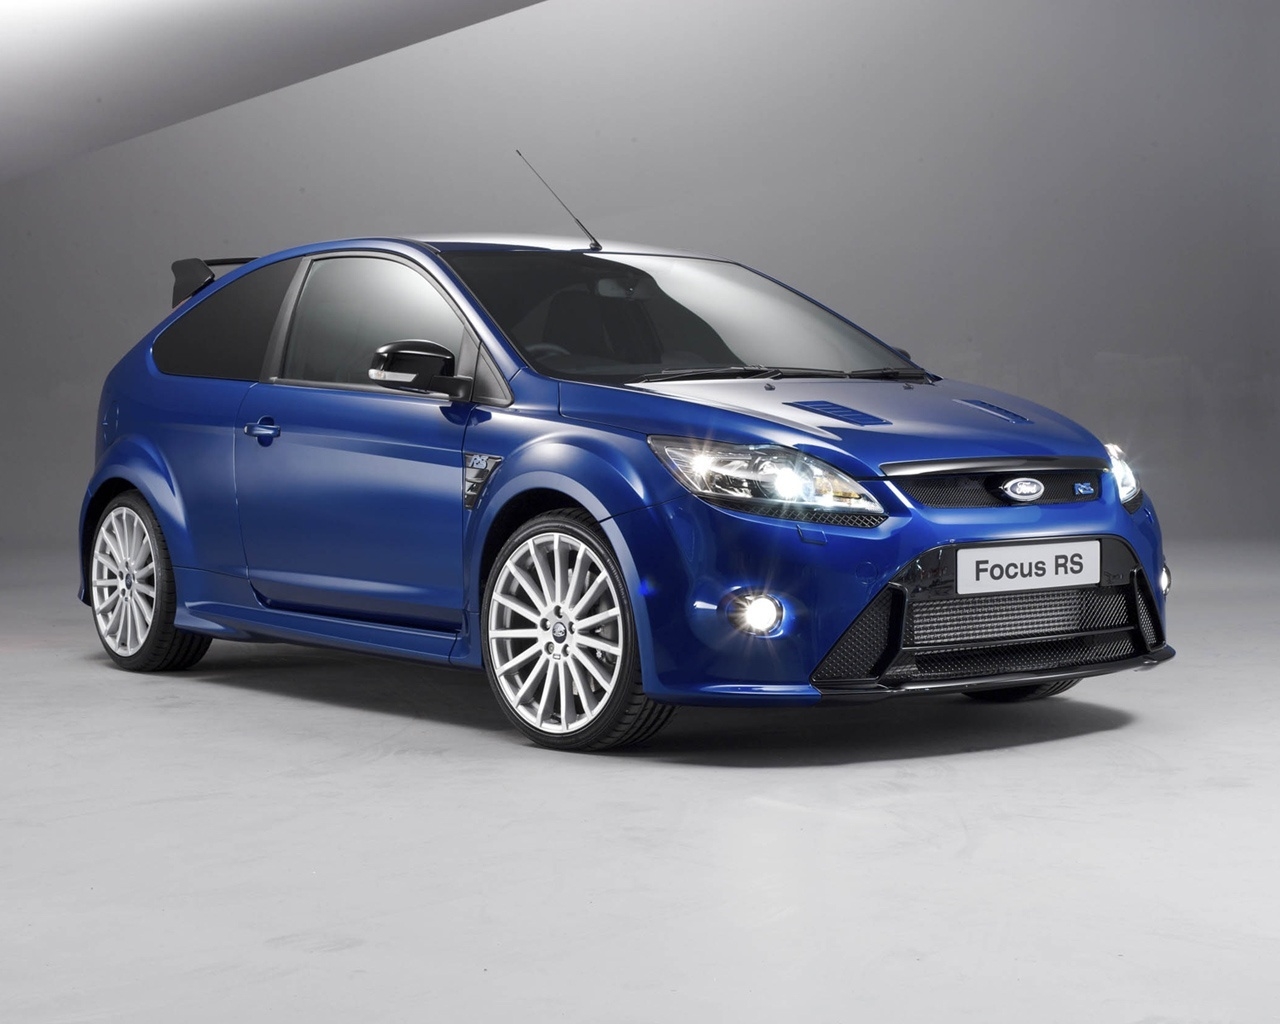 Ford Focus RS 2009 for 1280 x 1024 resolution